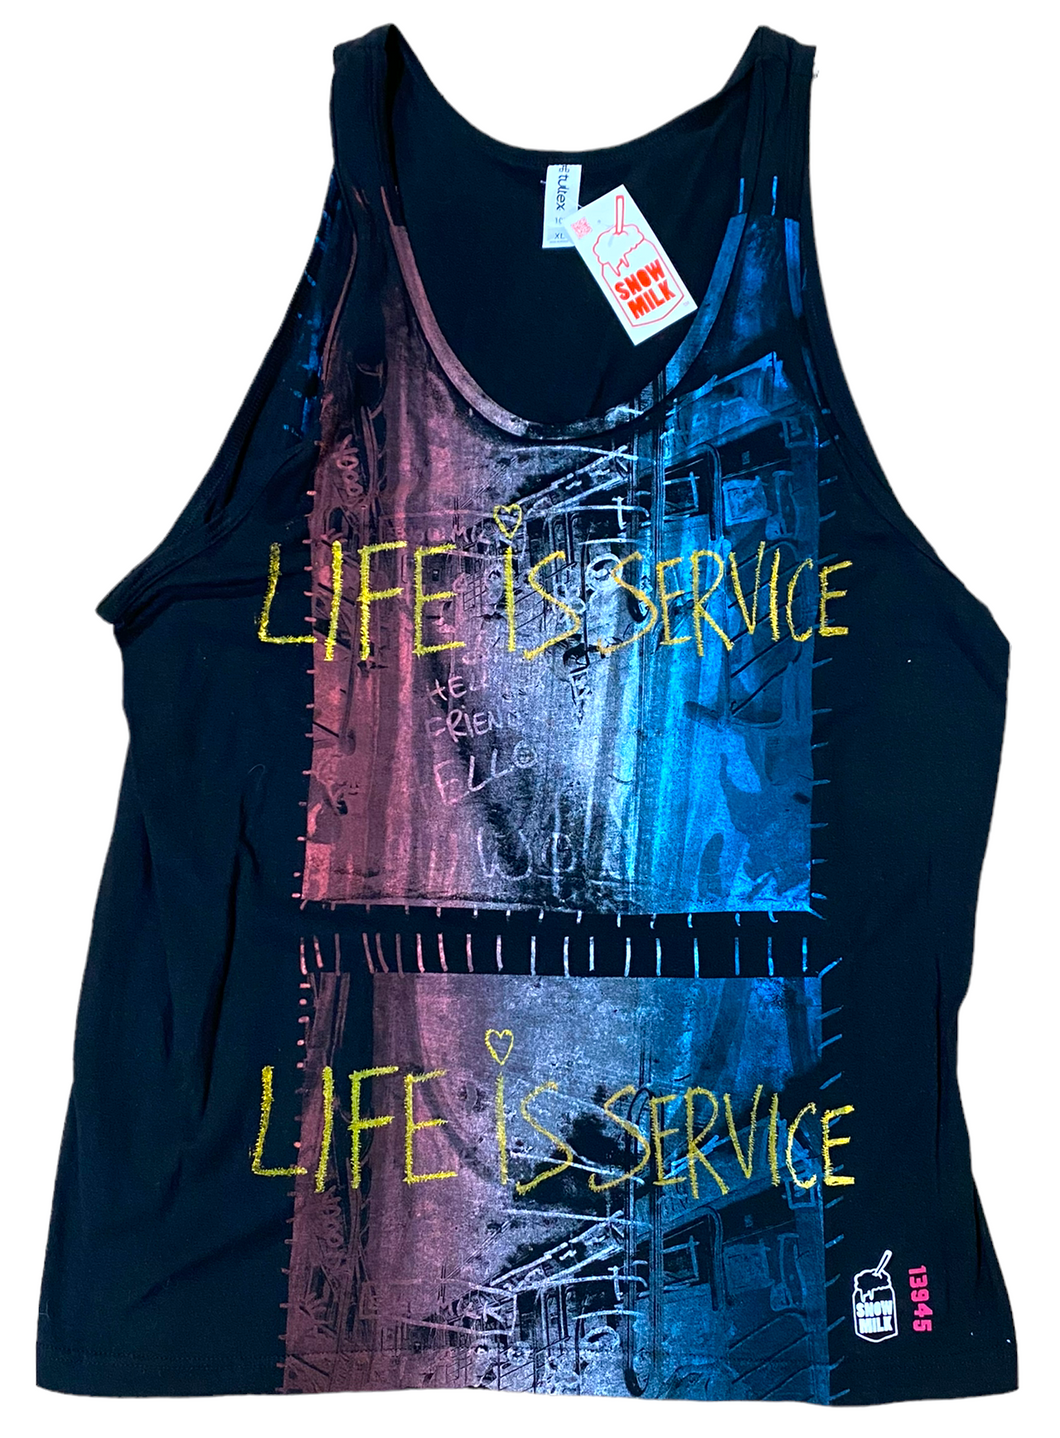 Life Is Service Train Photo Tank Top (Size XL)